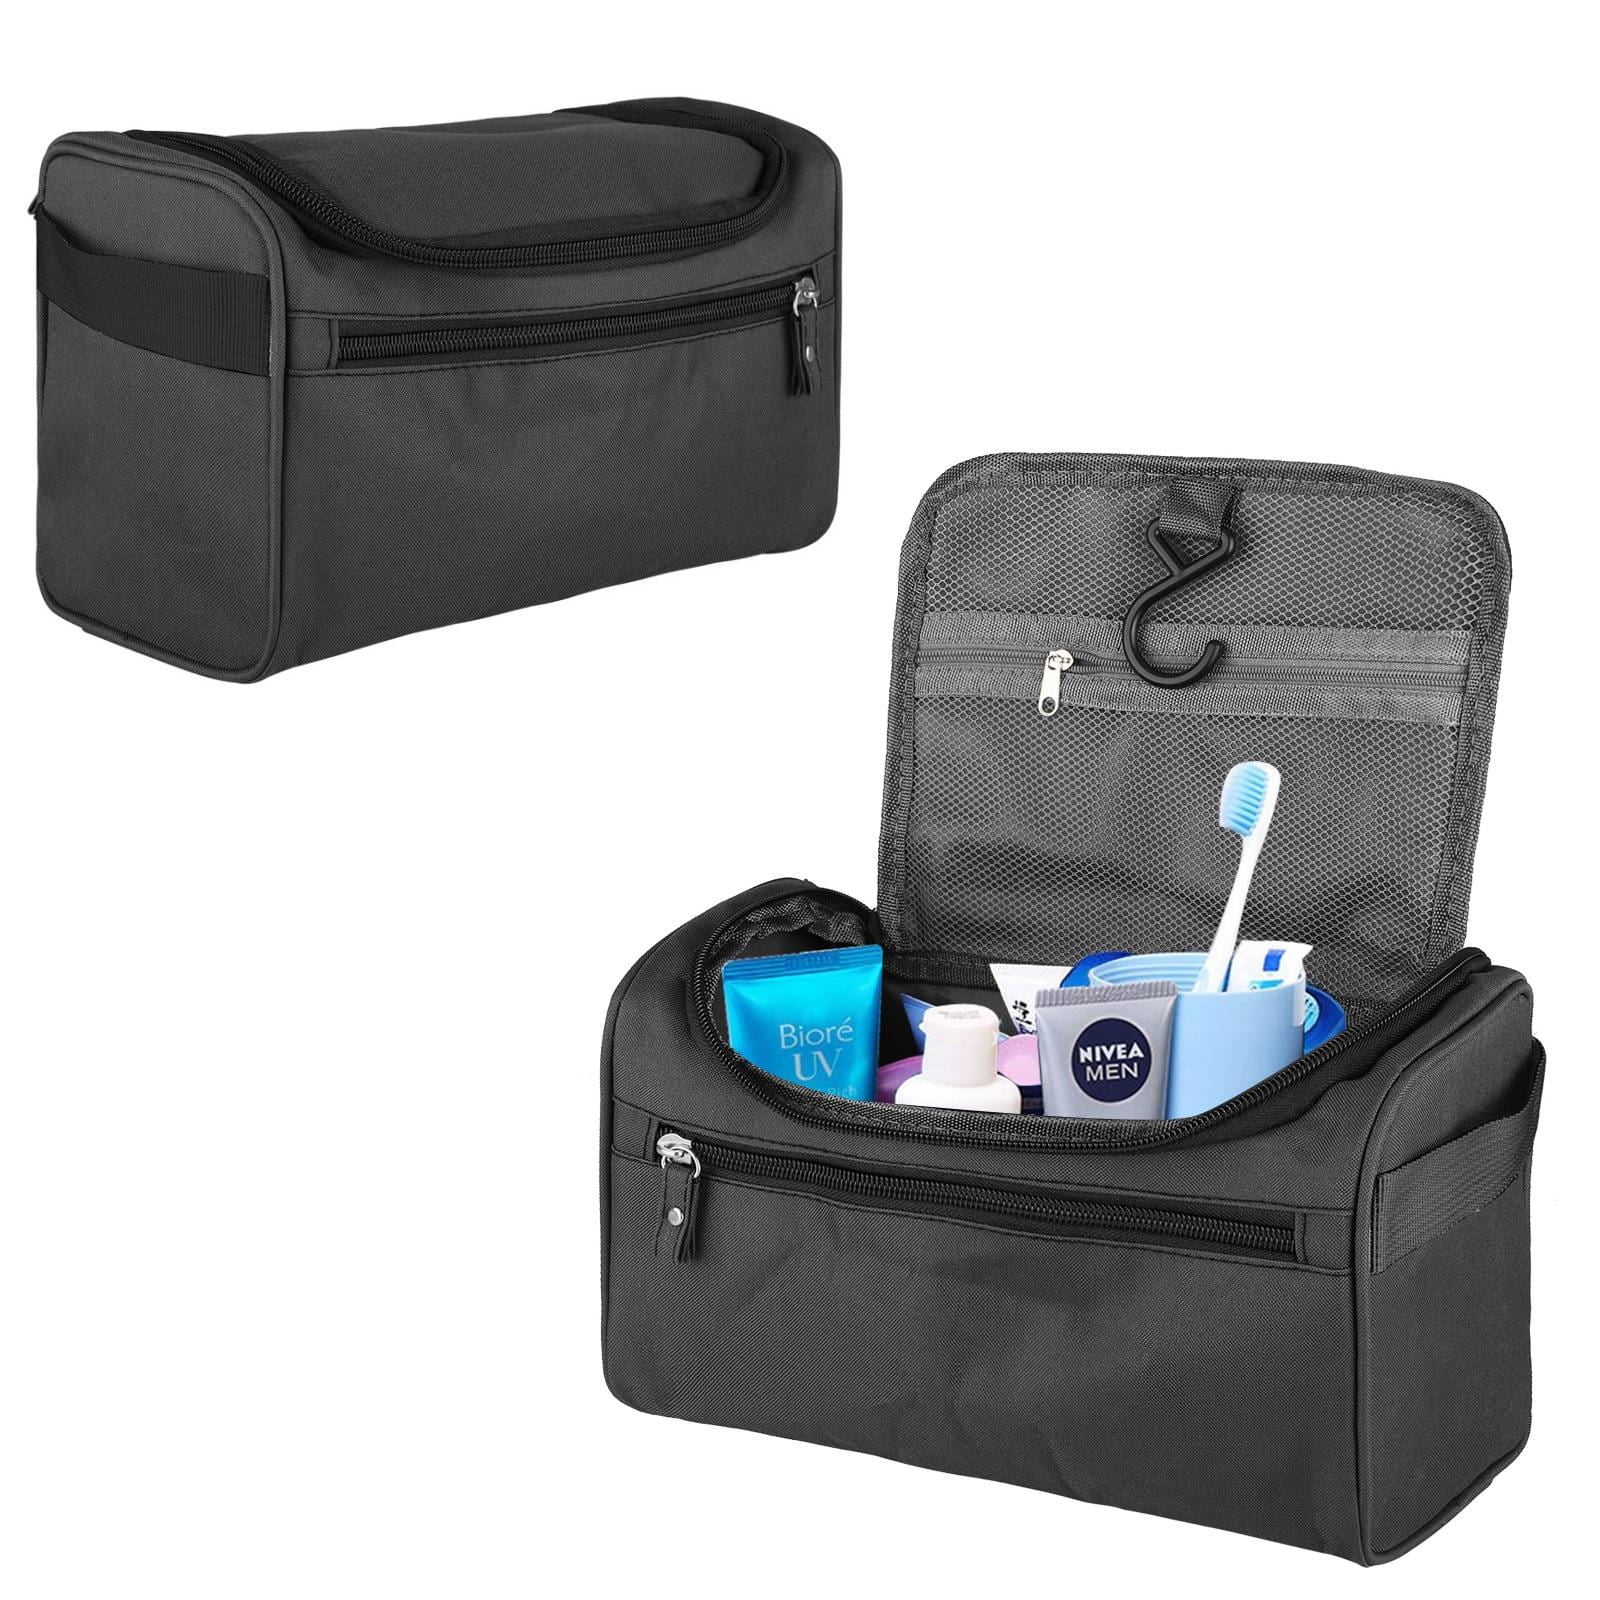 personalized travel bag organizer wash bag dopp kits toiletry bags cables cord organizer